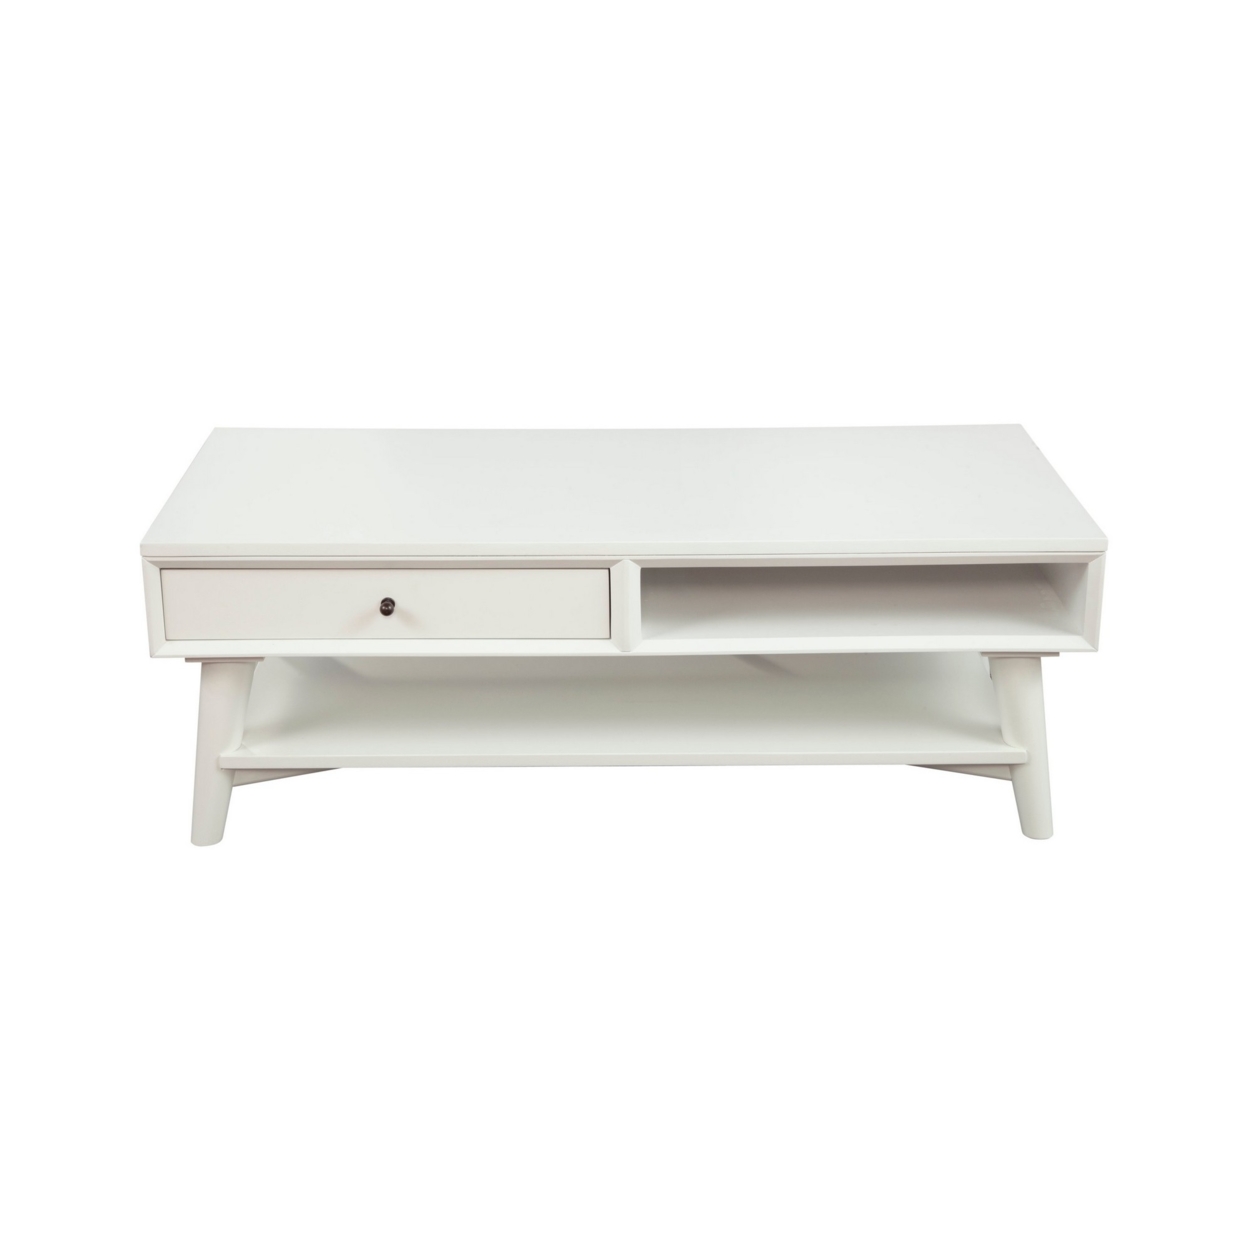 Coffee Table With 1 Drawer And Open Shelf, White- Saltoro Sherpi